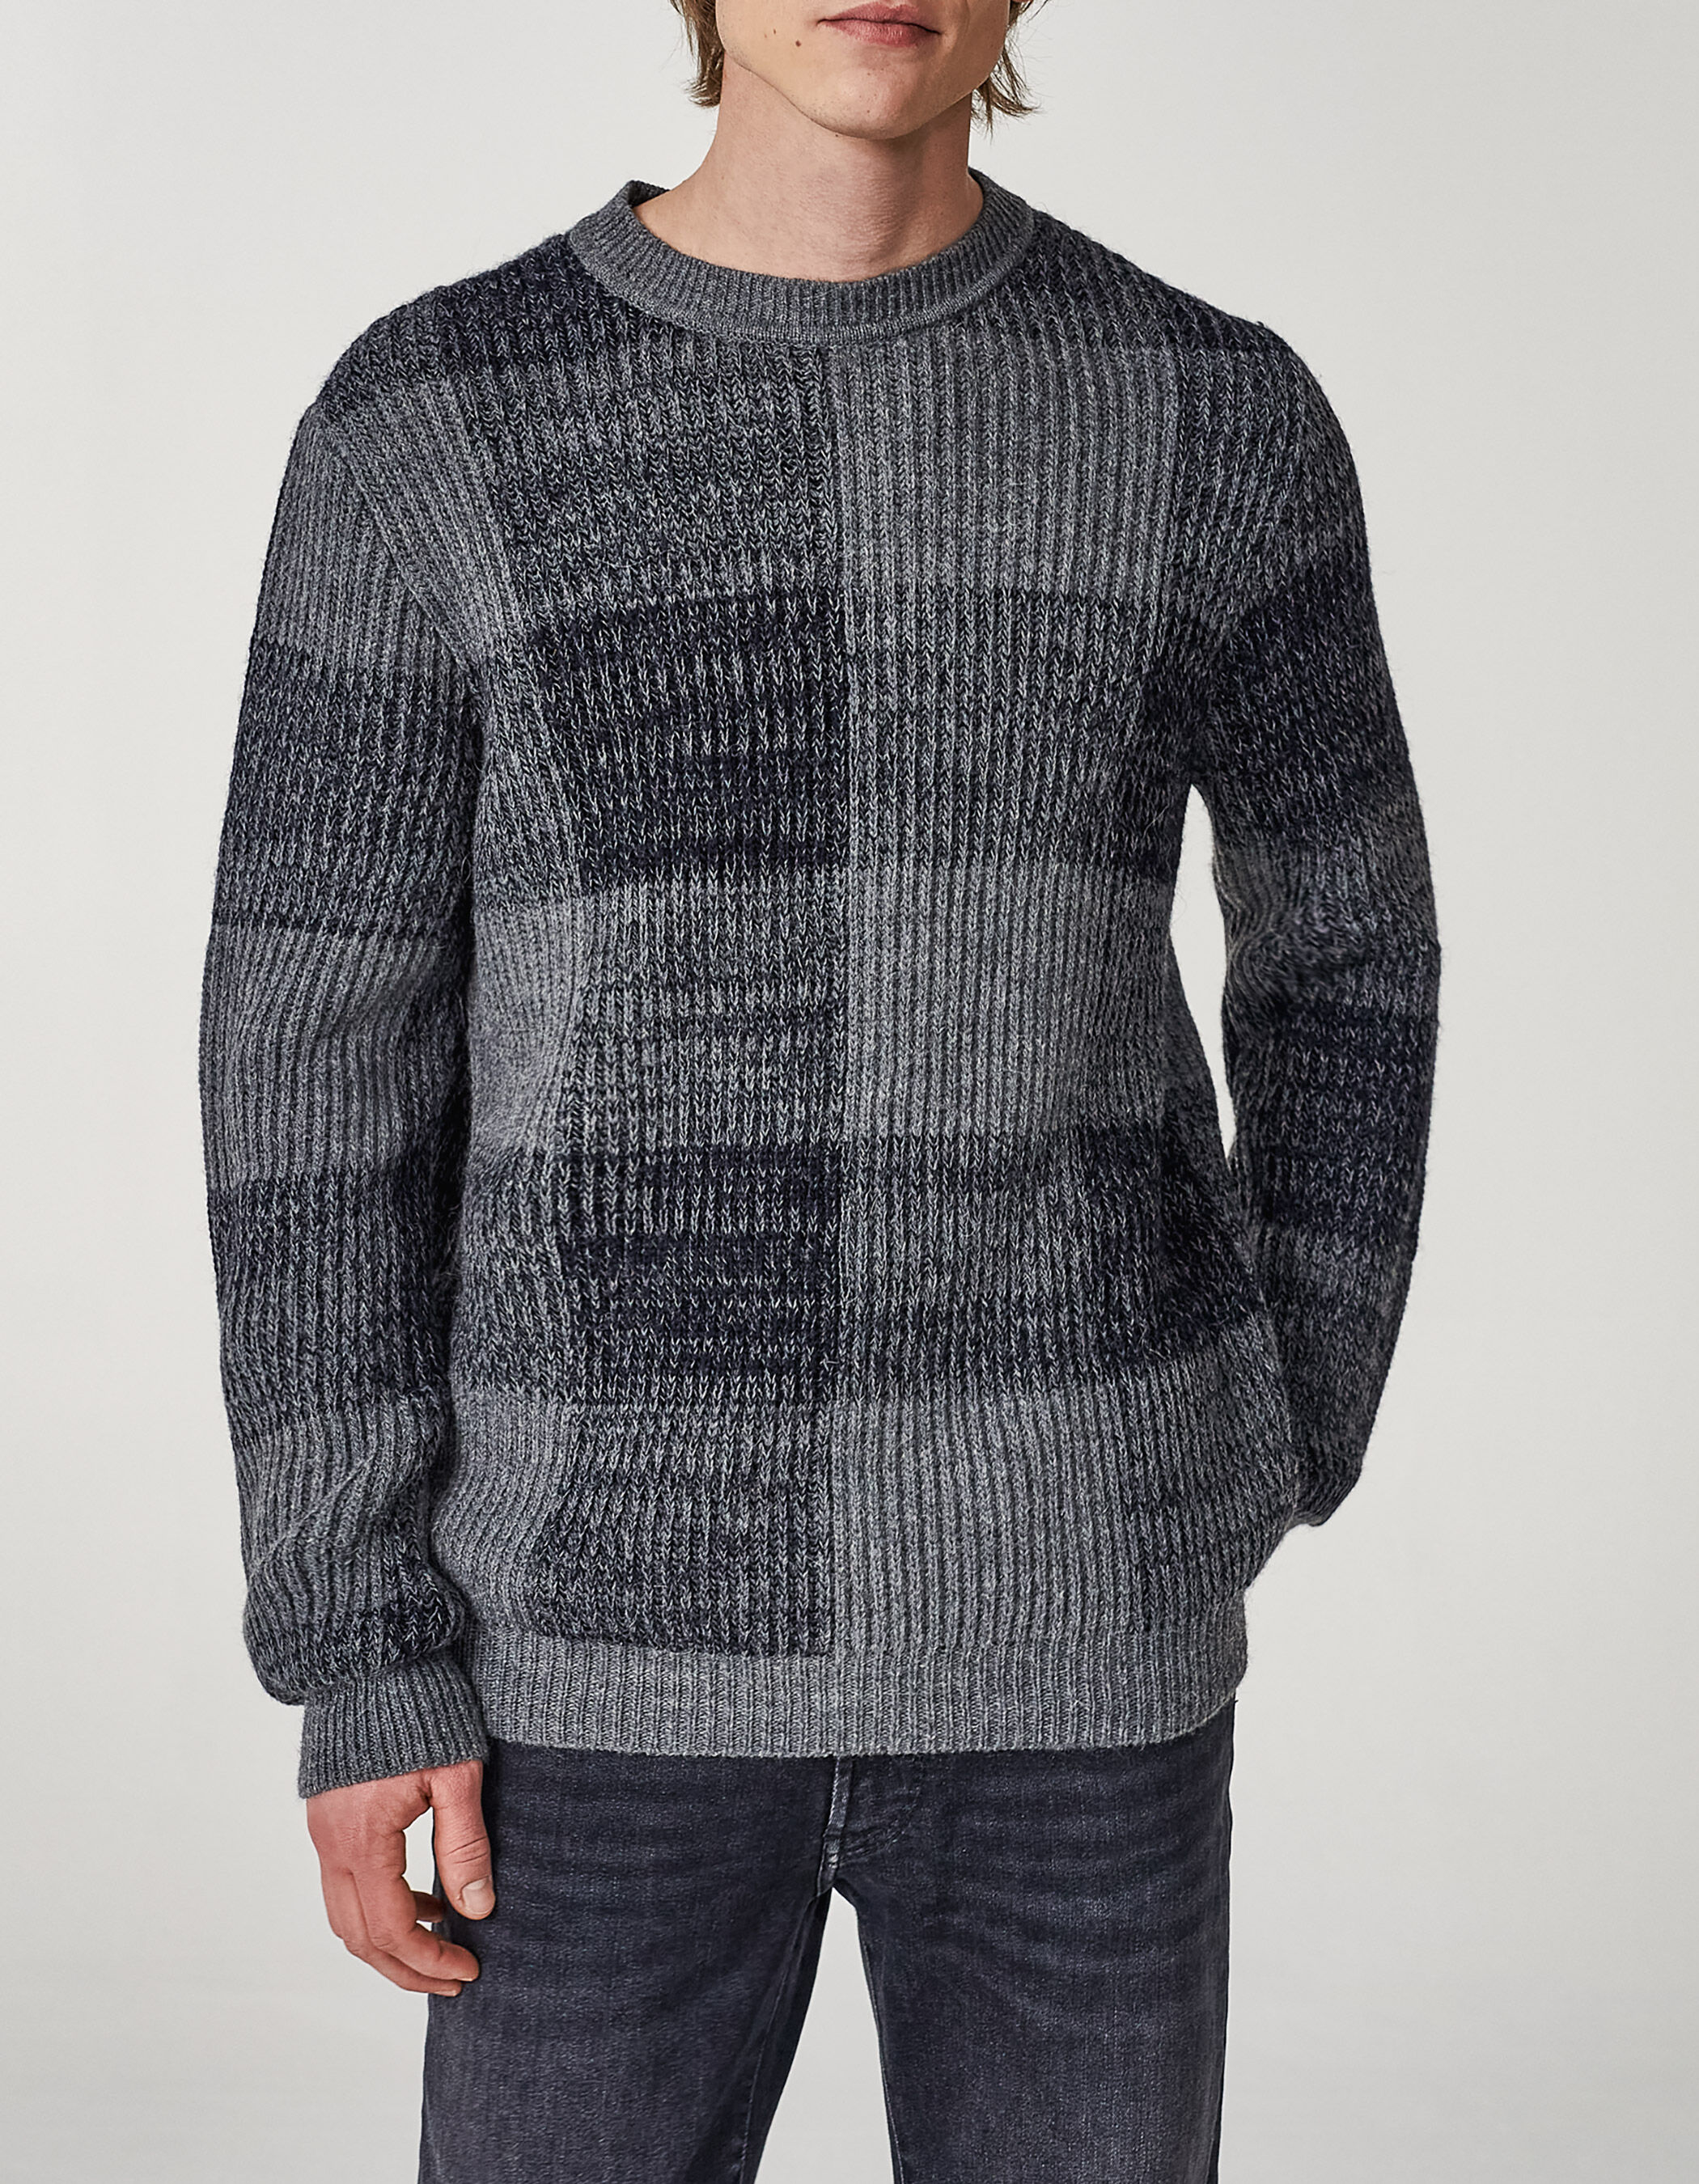 Men's navy checked knit sweater